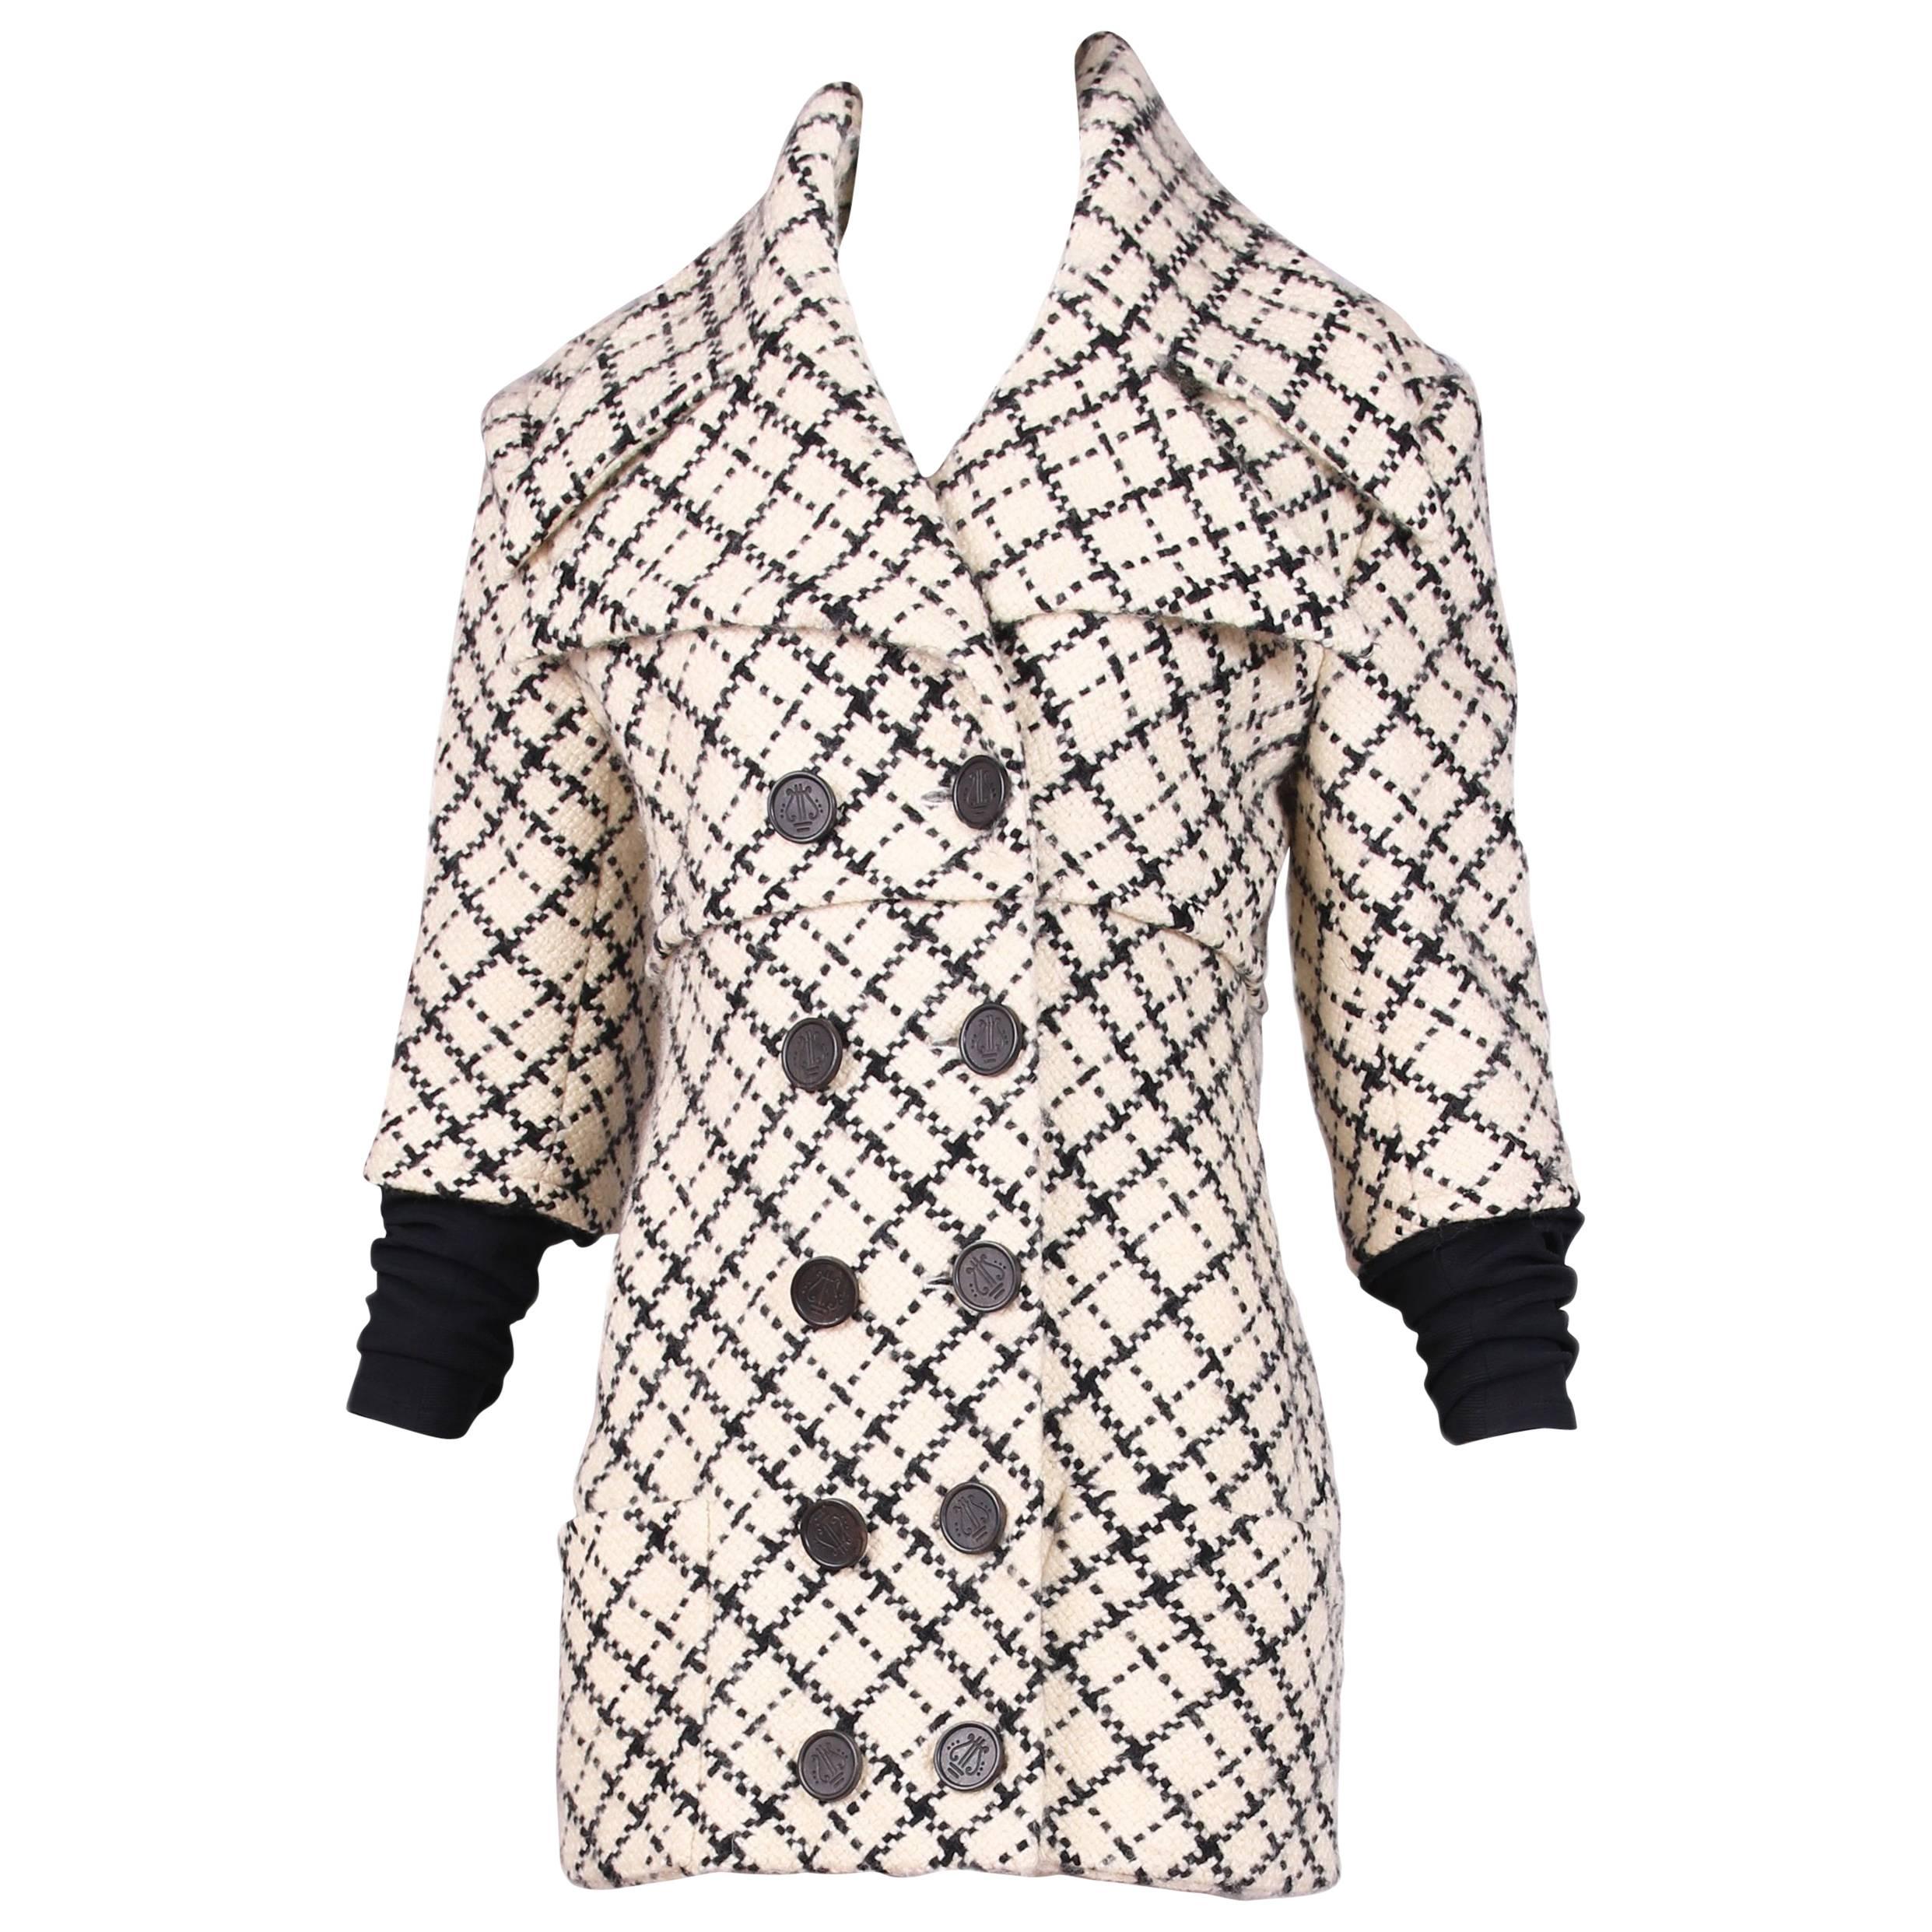 Givenchy Black White Plaid Oversized Collar Jacket with Lycra Sleeve Attachment